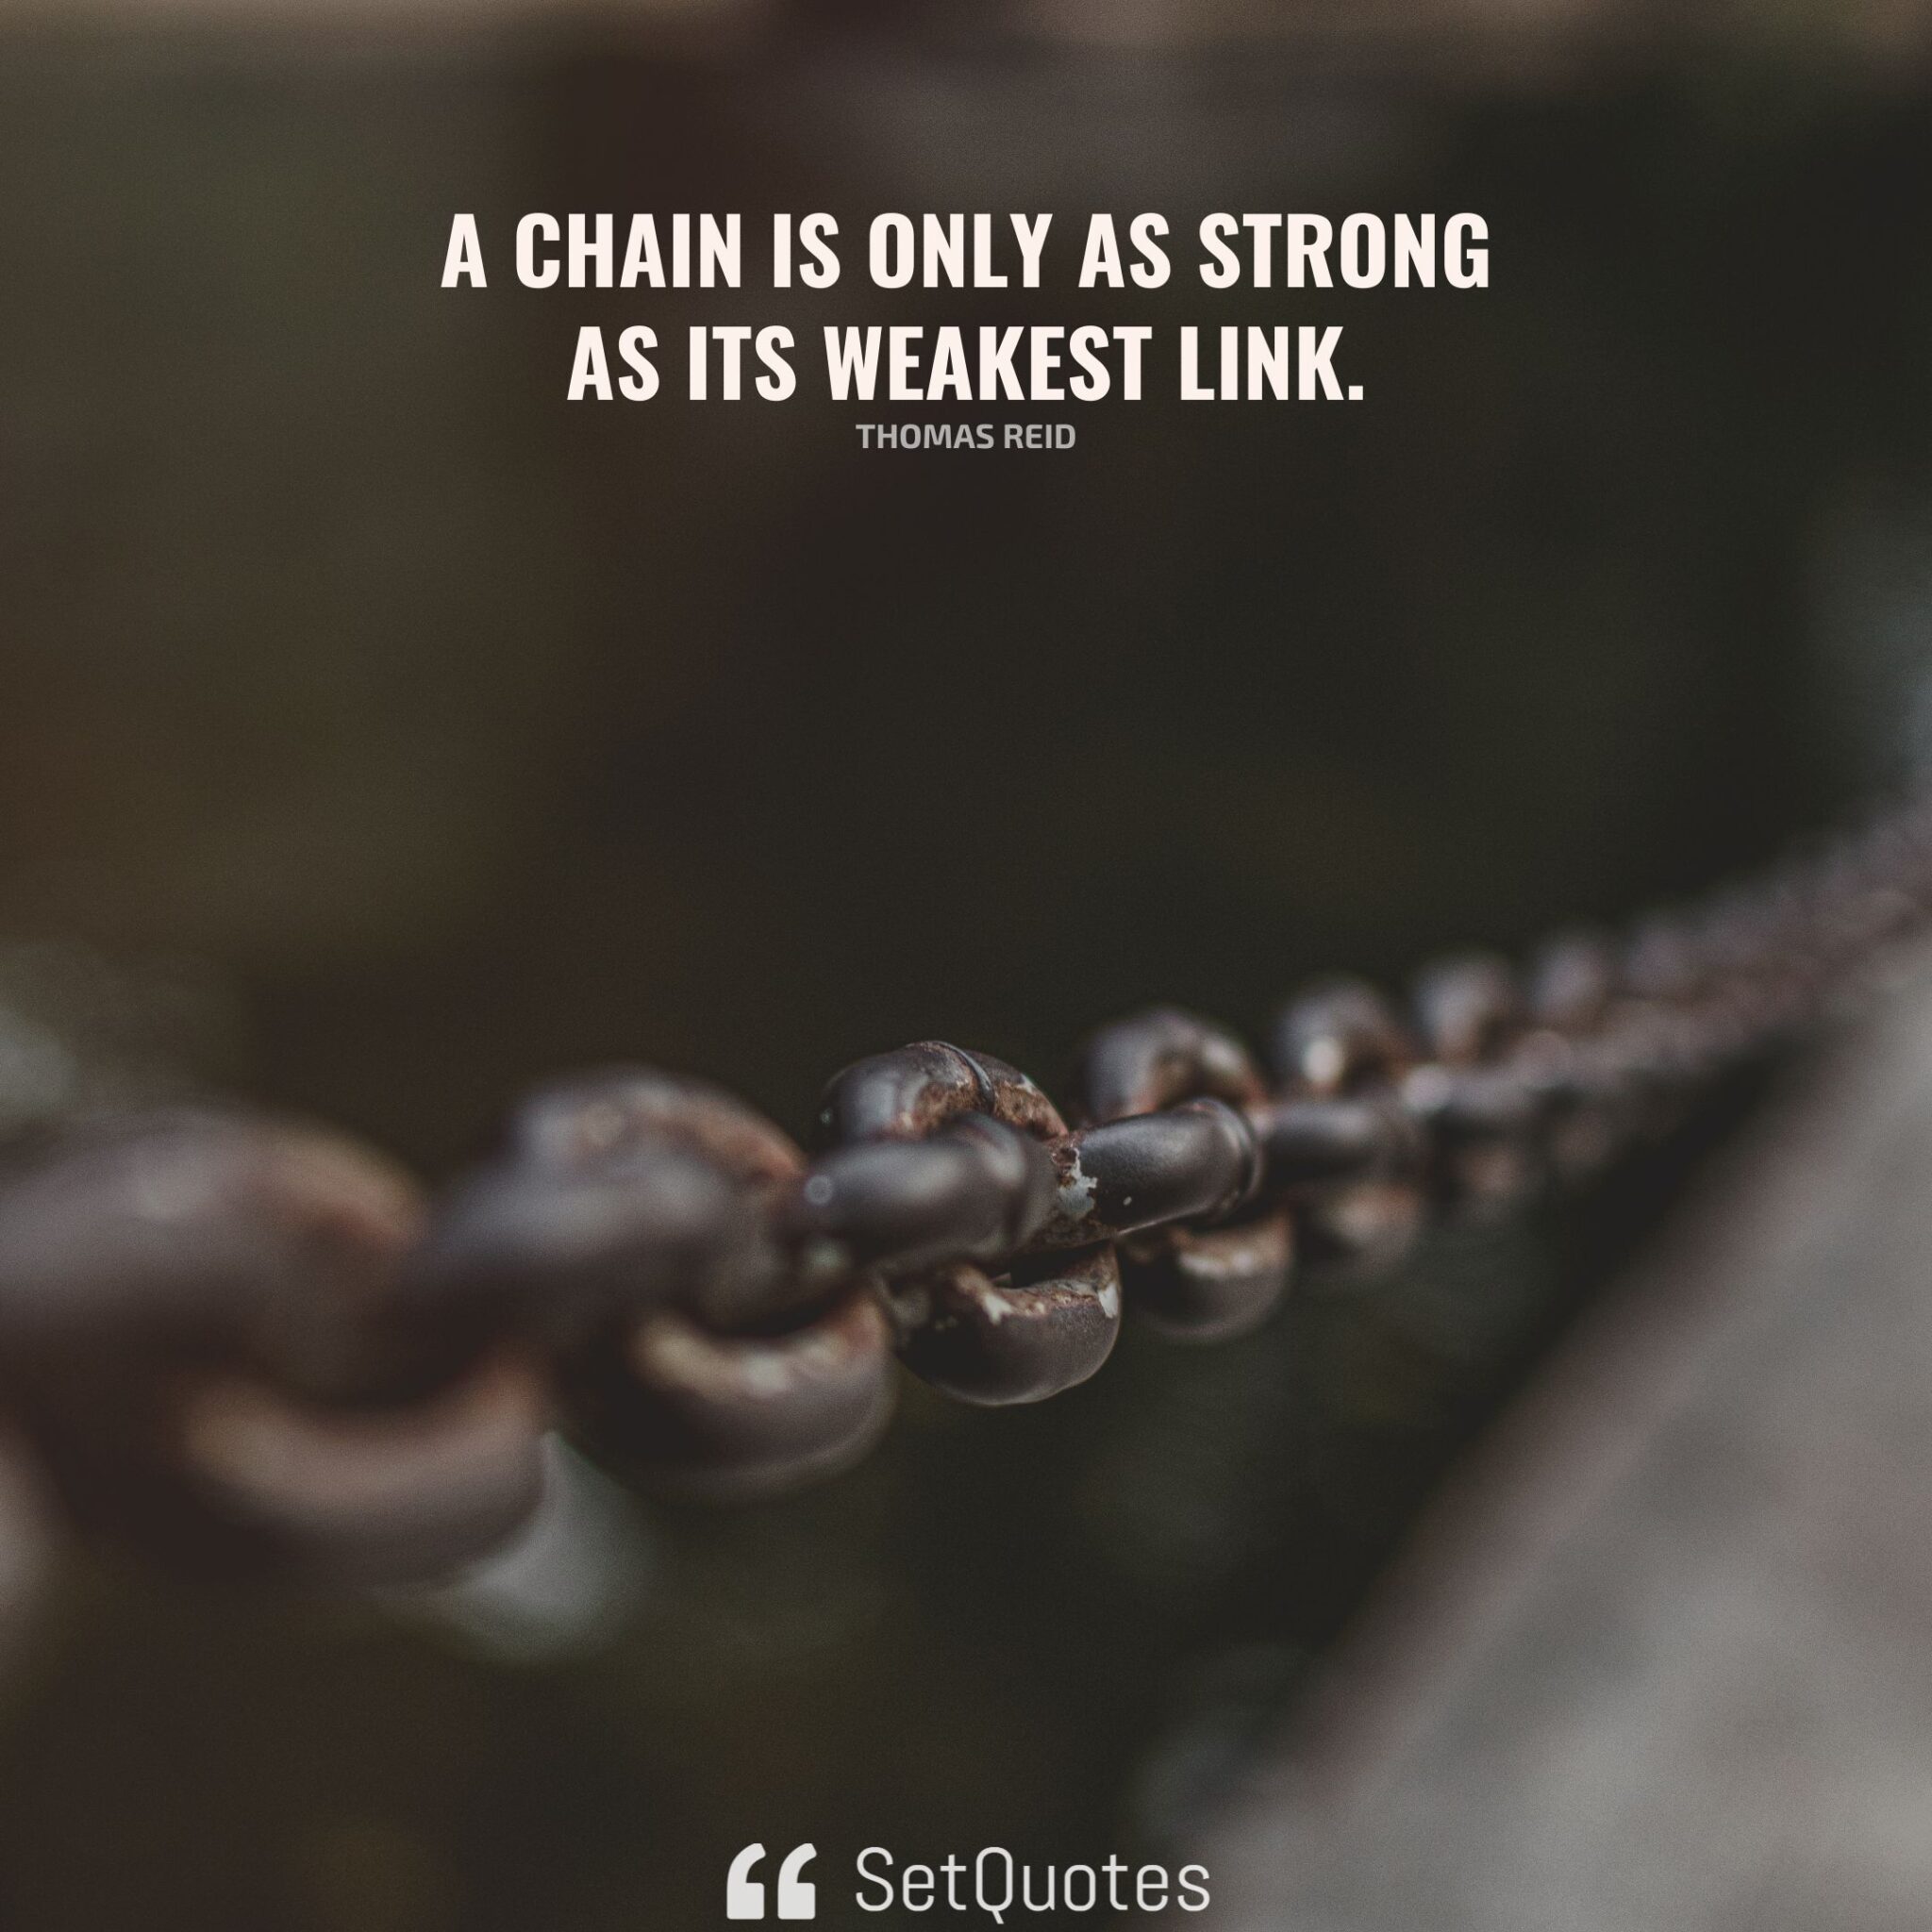 A Chain Is Only As Strong As Its Weakest Link Meaning